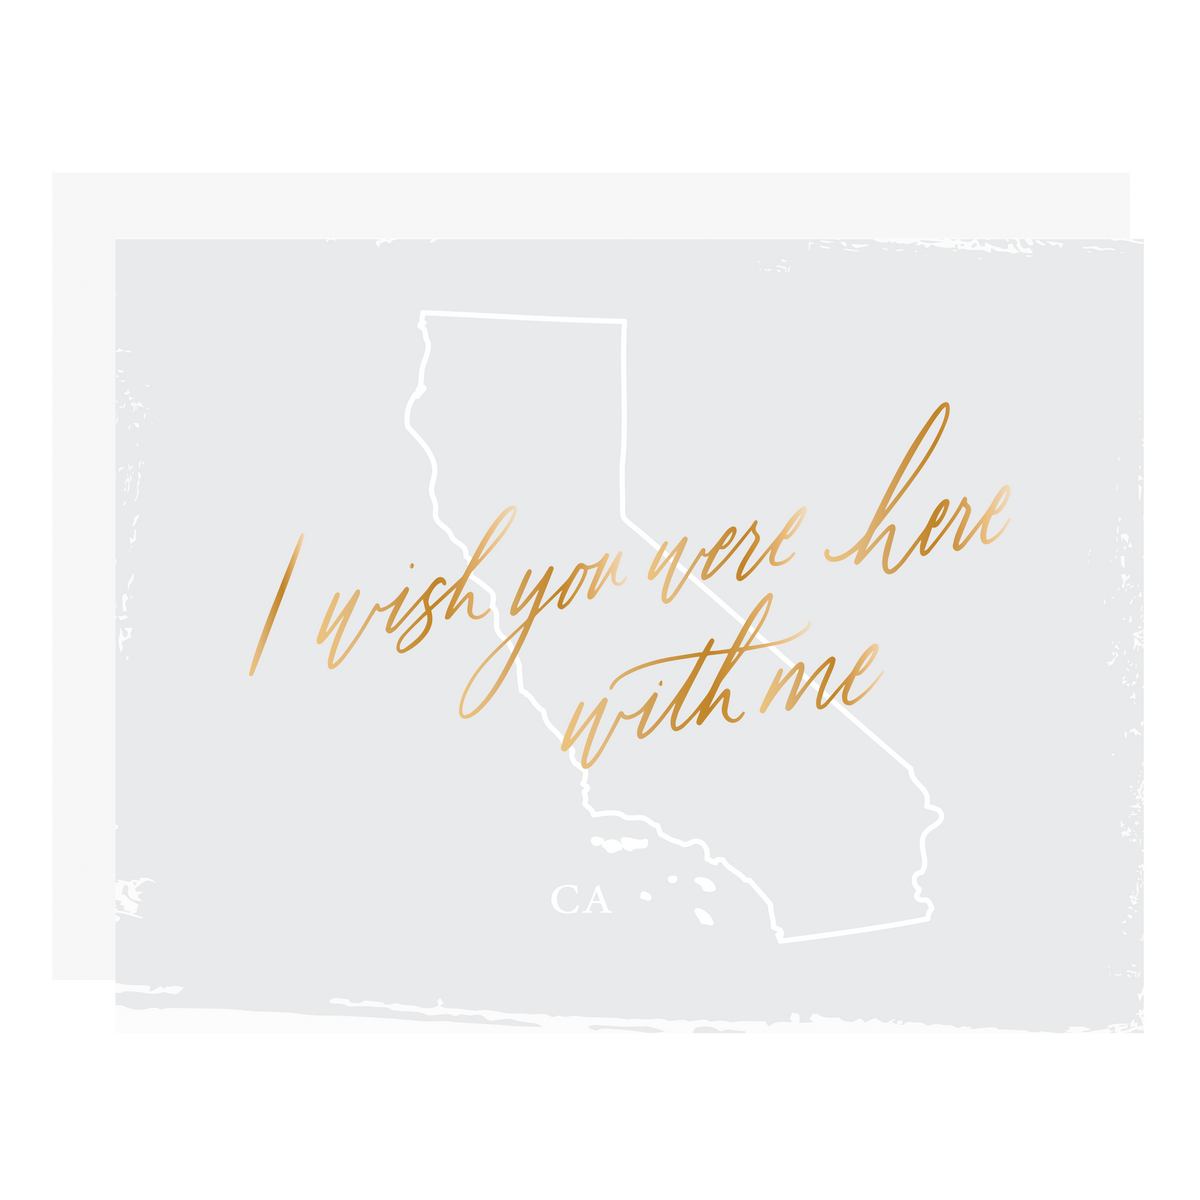 &quot;Wish You Were Here With Me - California&quot;, letterpress printed by hand with gold foil. 